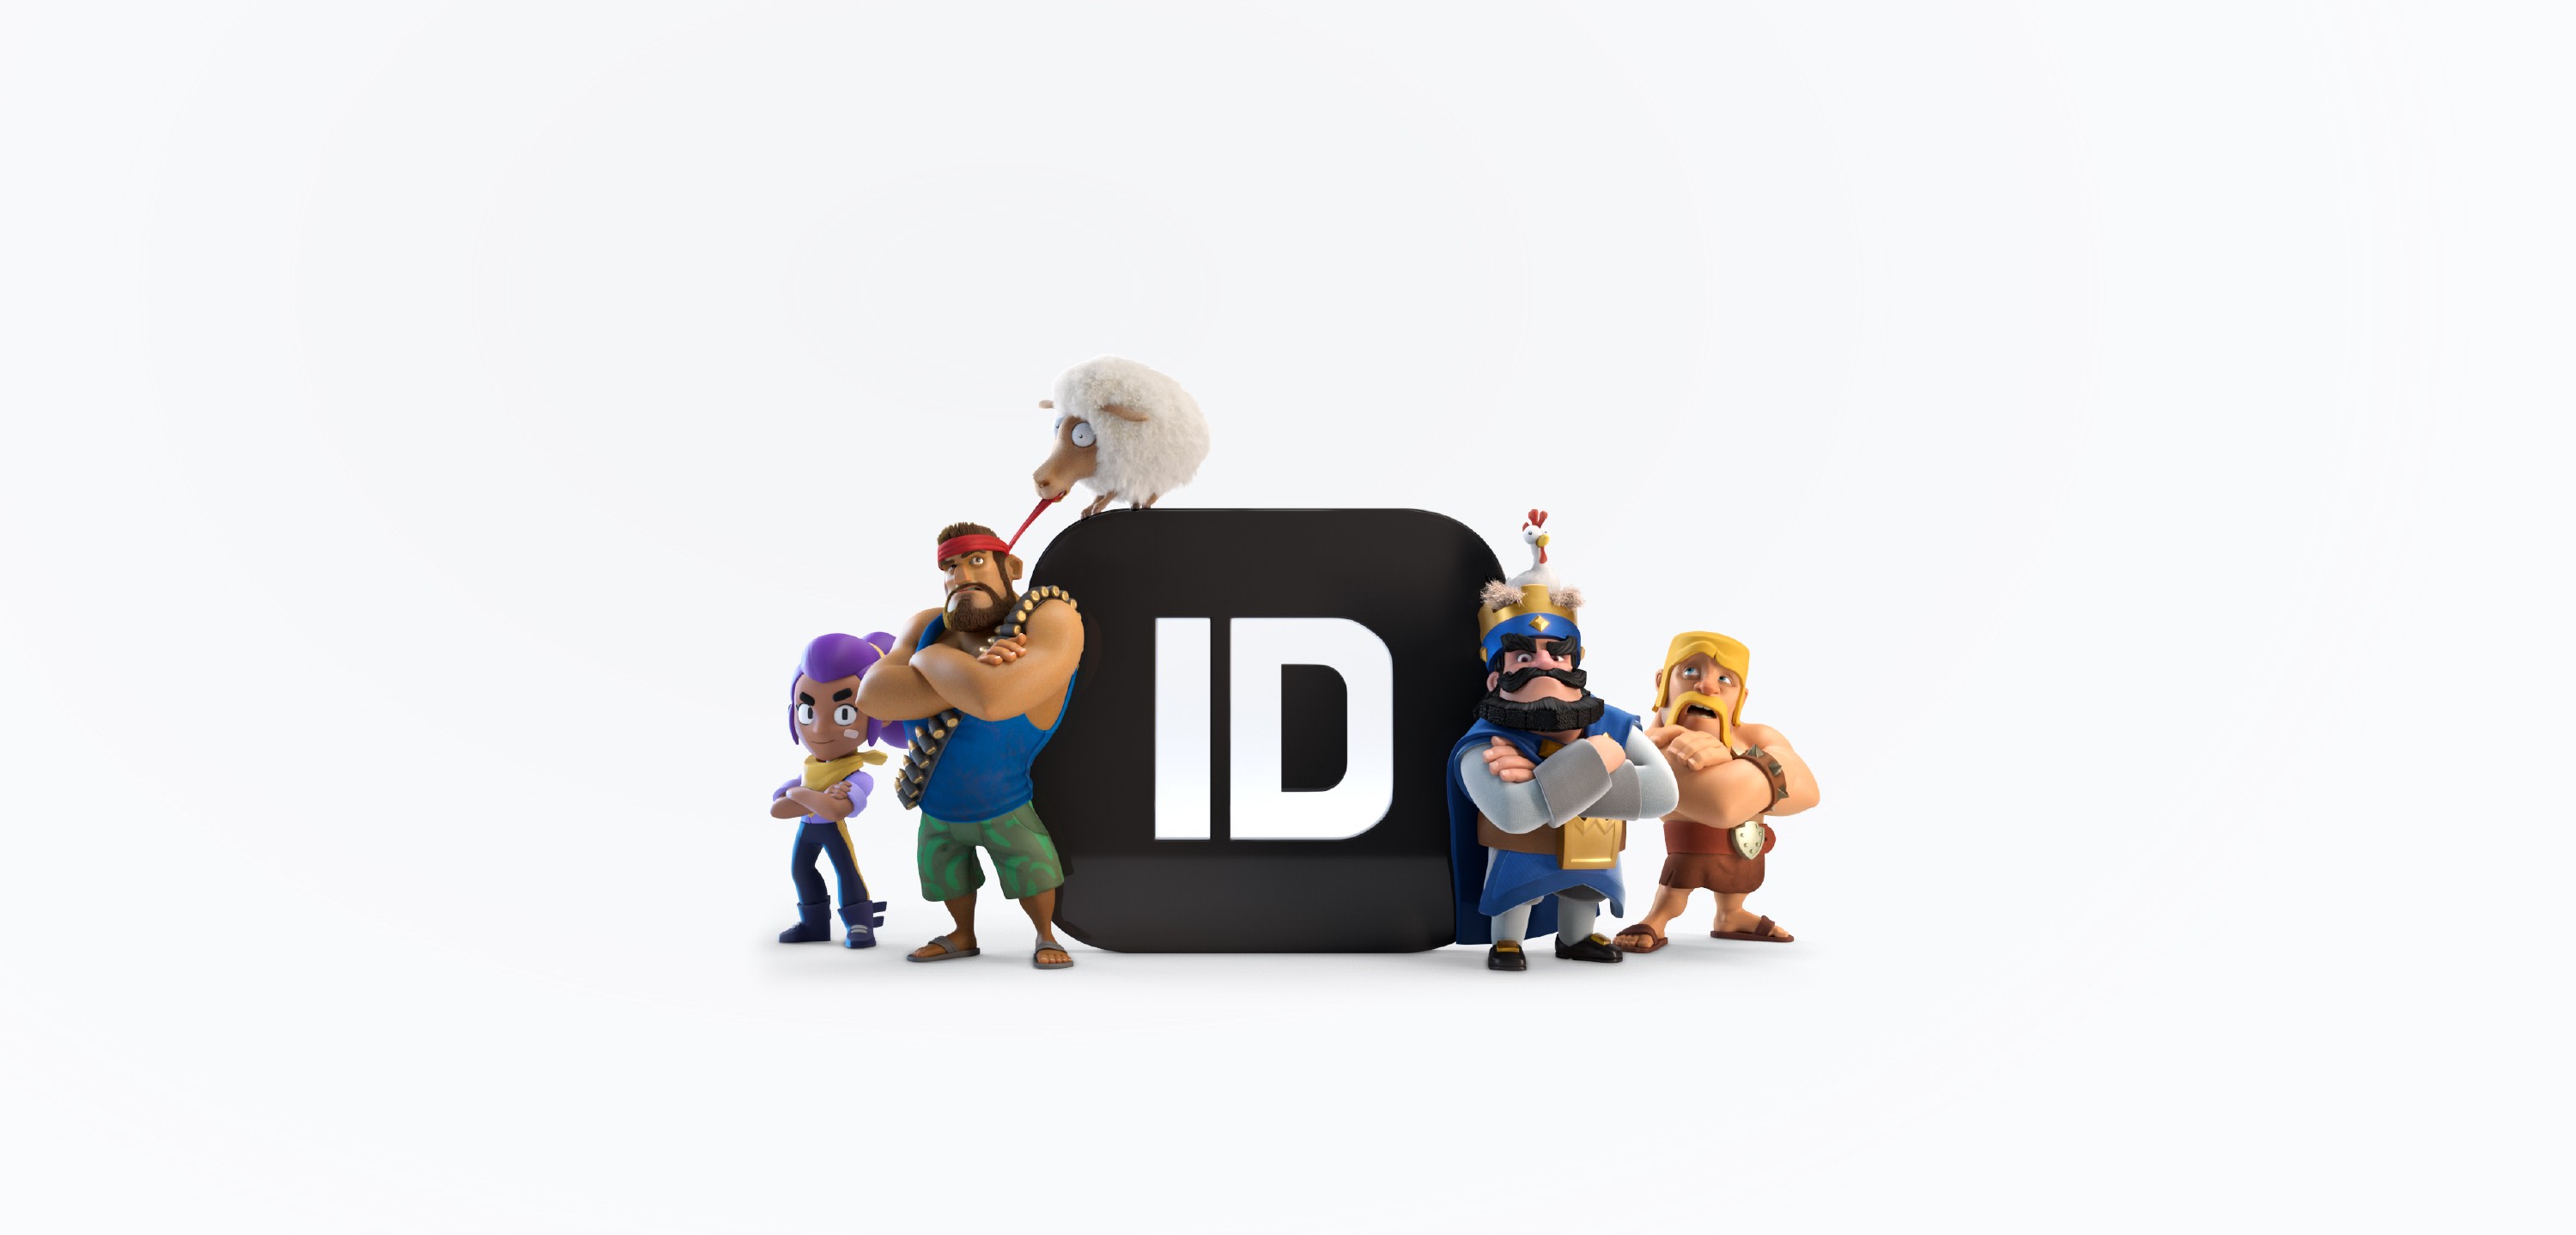 Https id supercell com. Supercell ID. Игры от Supercell ID. Логотип Supercell ID.